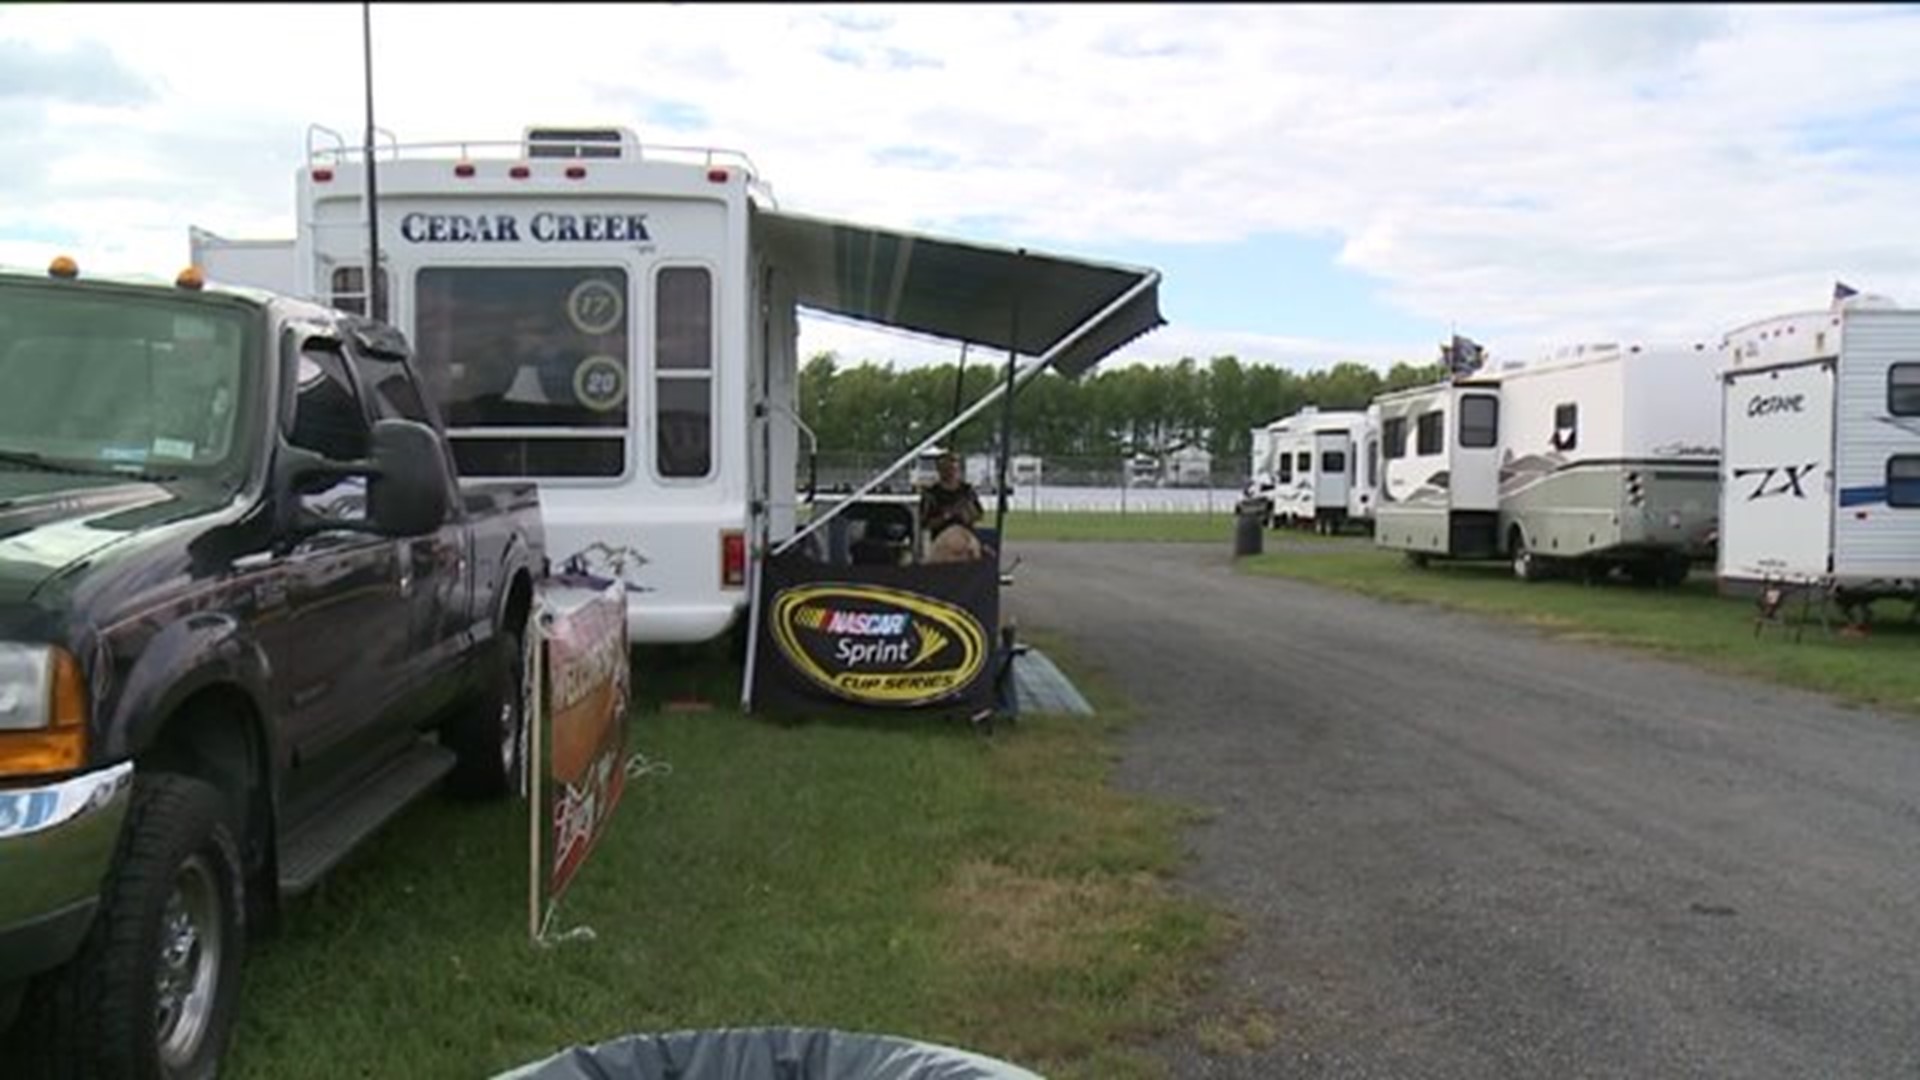 Fans Camped Out At Pocono Raceway For NASCAR Weekend